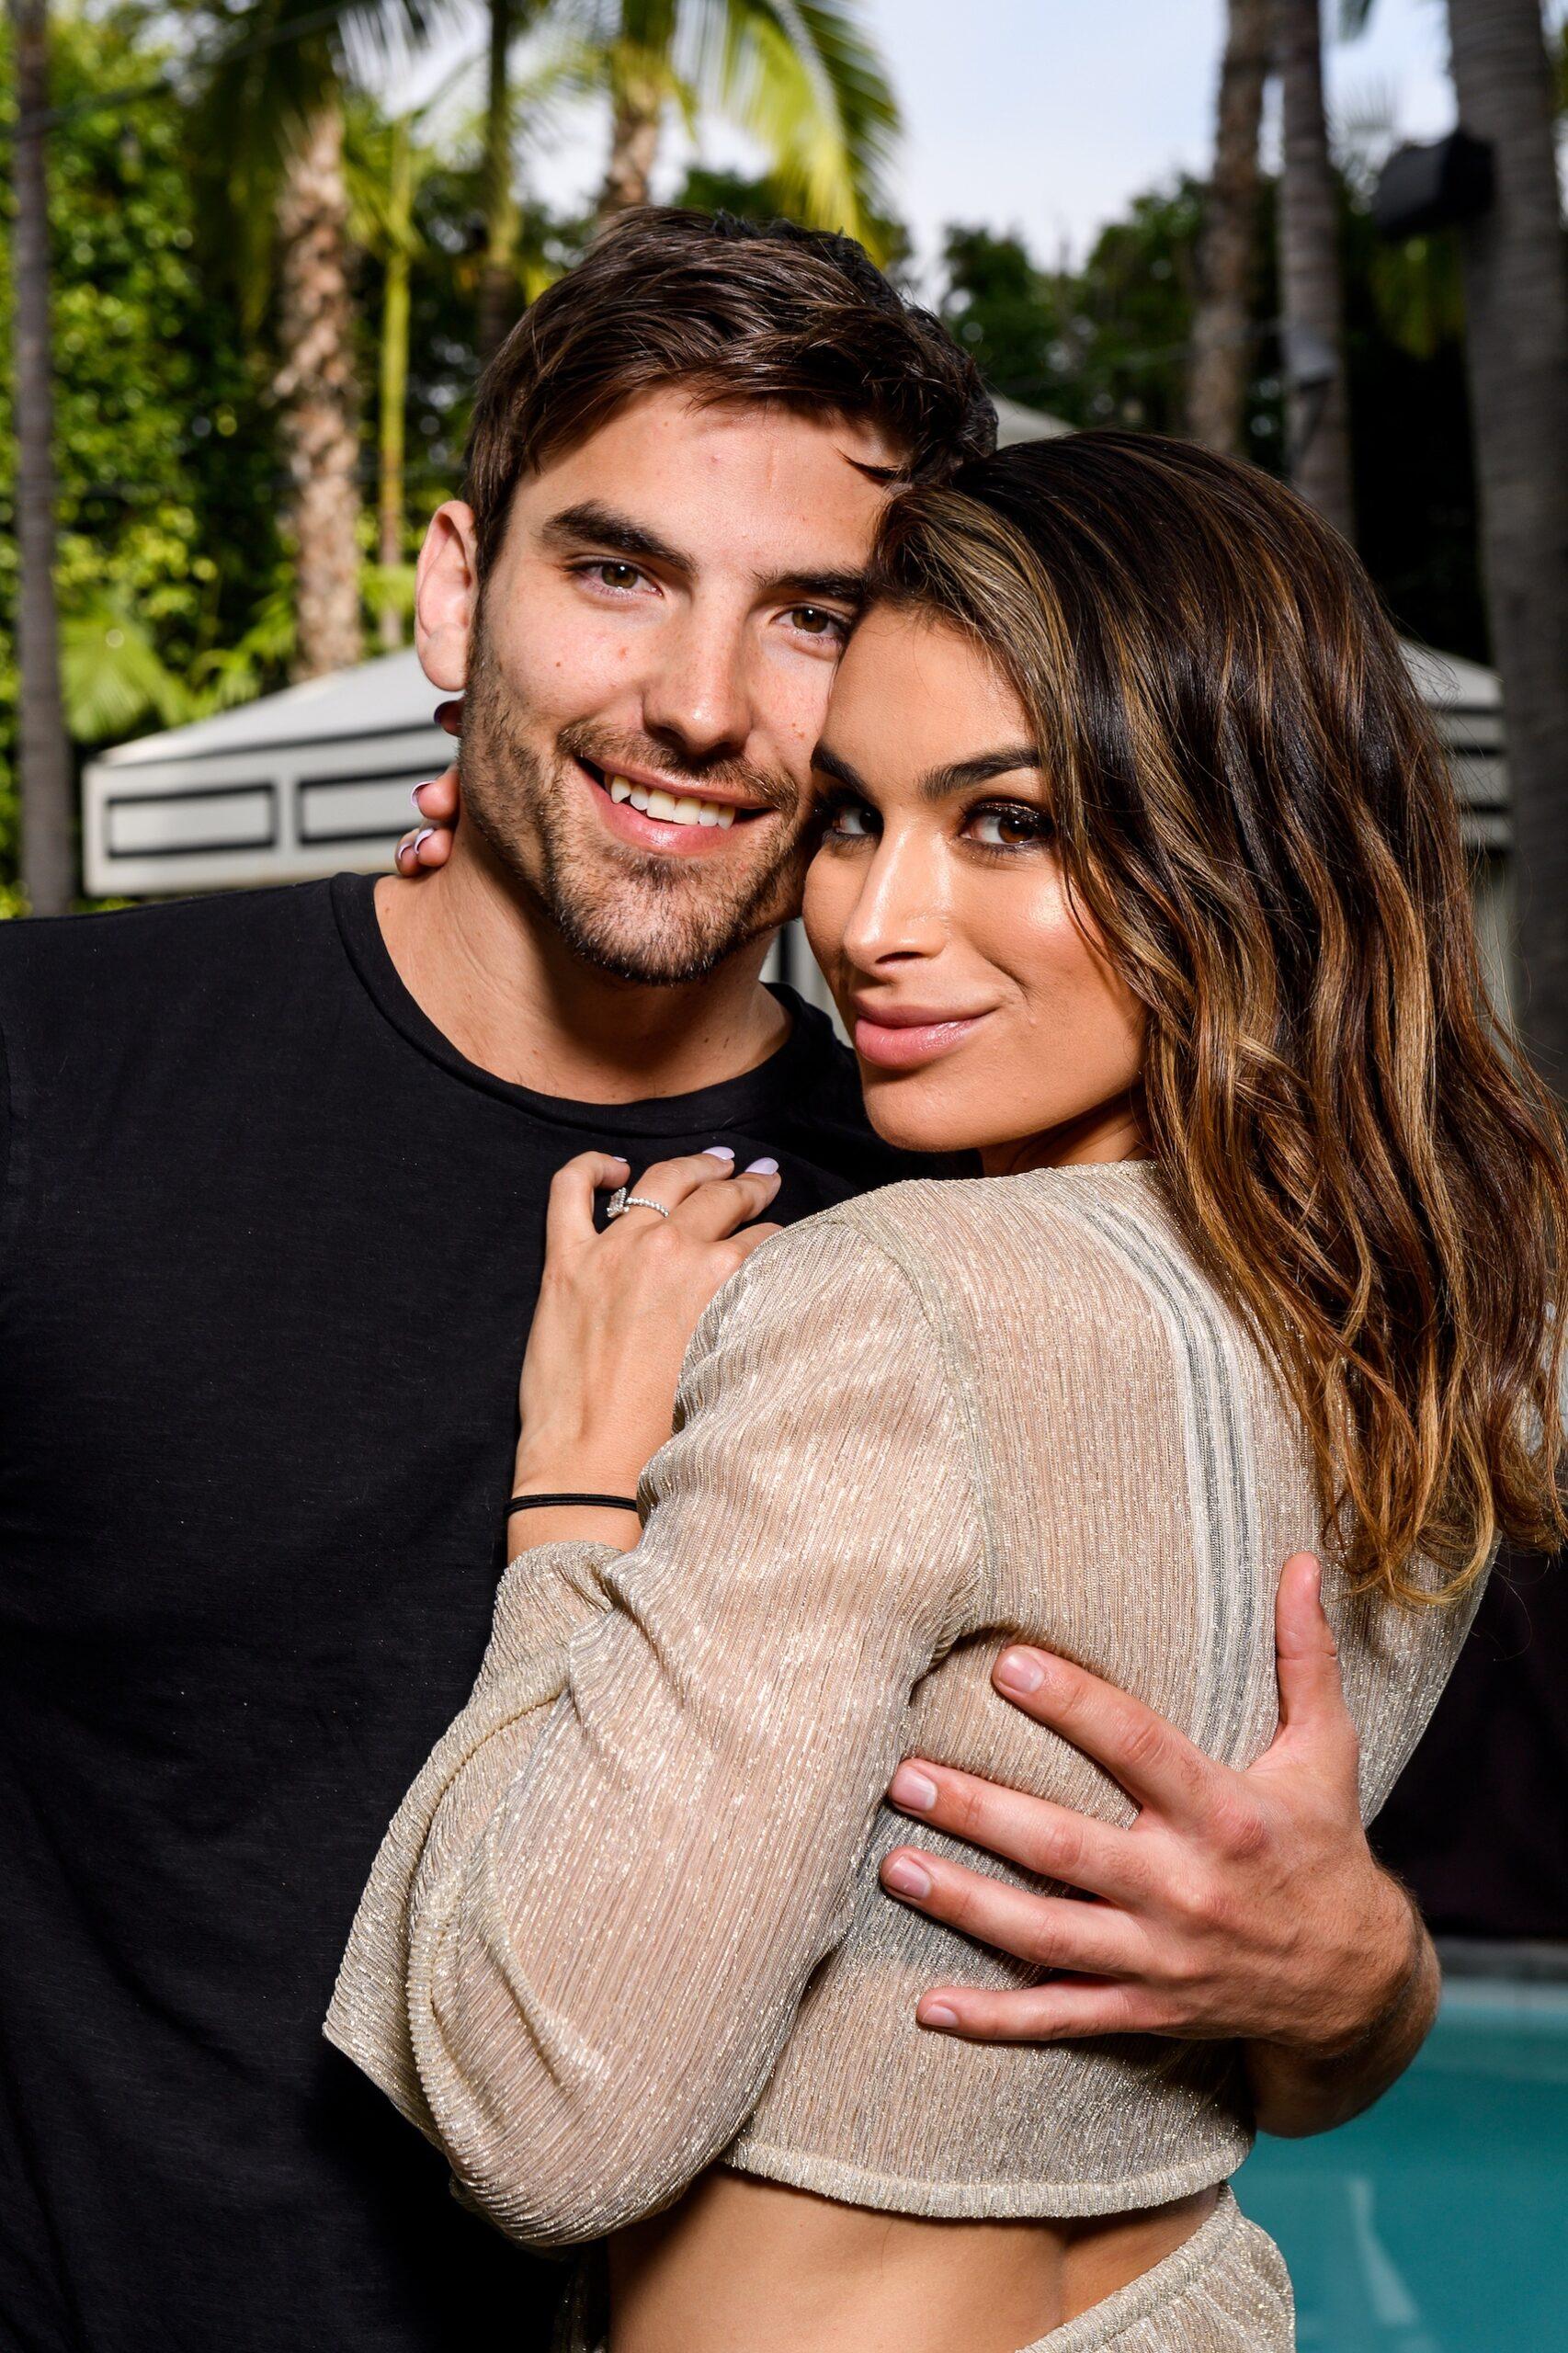 Bachelor couple Ashley Iaconetti and Jared Haibon celebrate upcoming nuptials in Santa Monica with best friends